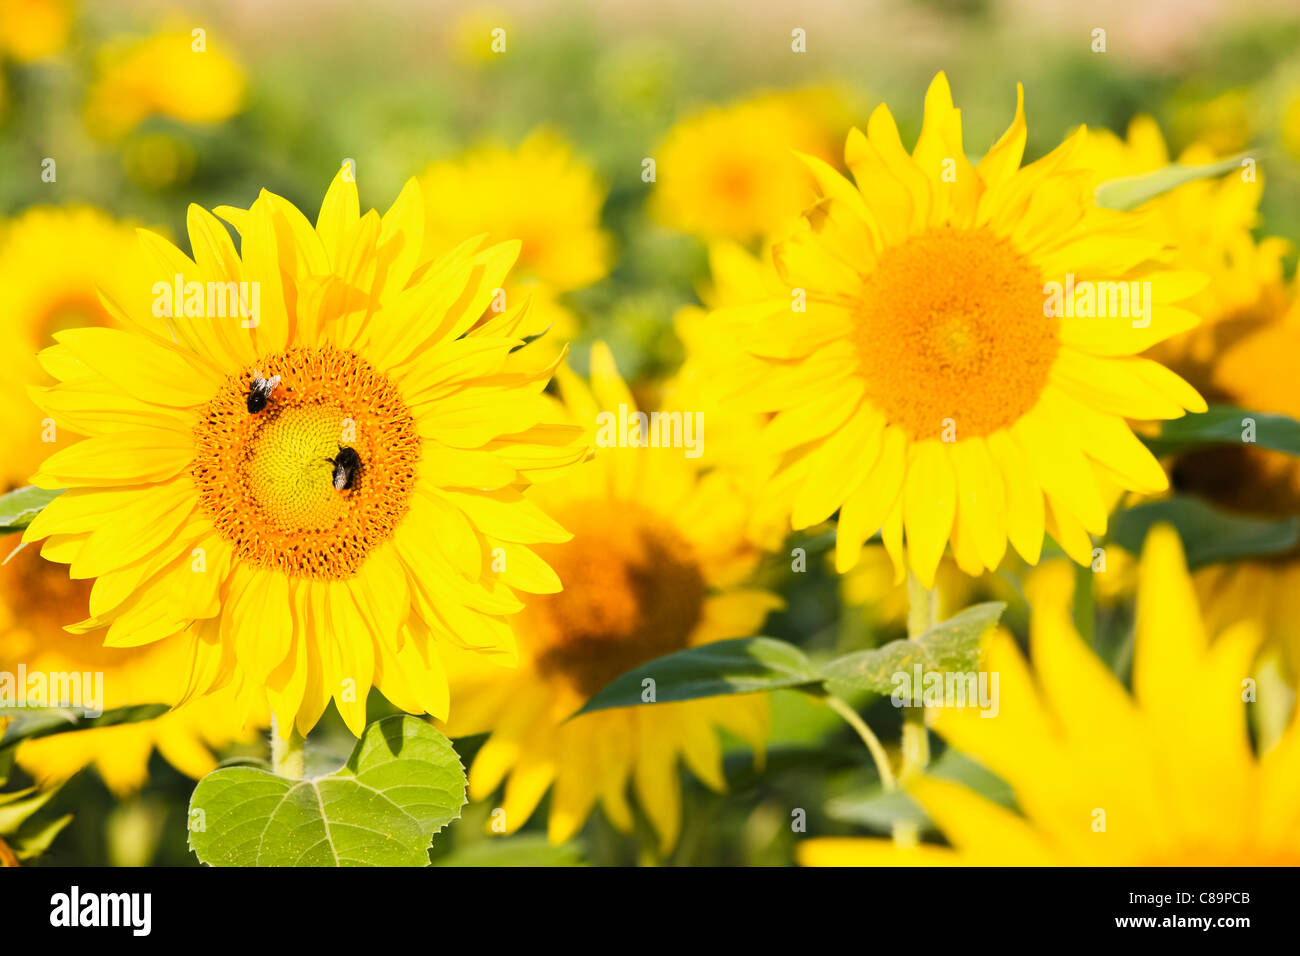 Germany, Bavaria, Bumble bees in sunflower field Stock Photo